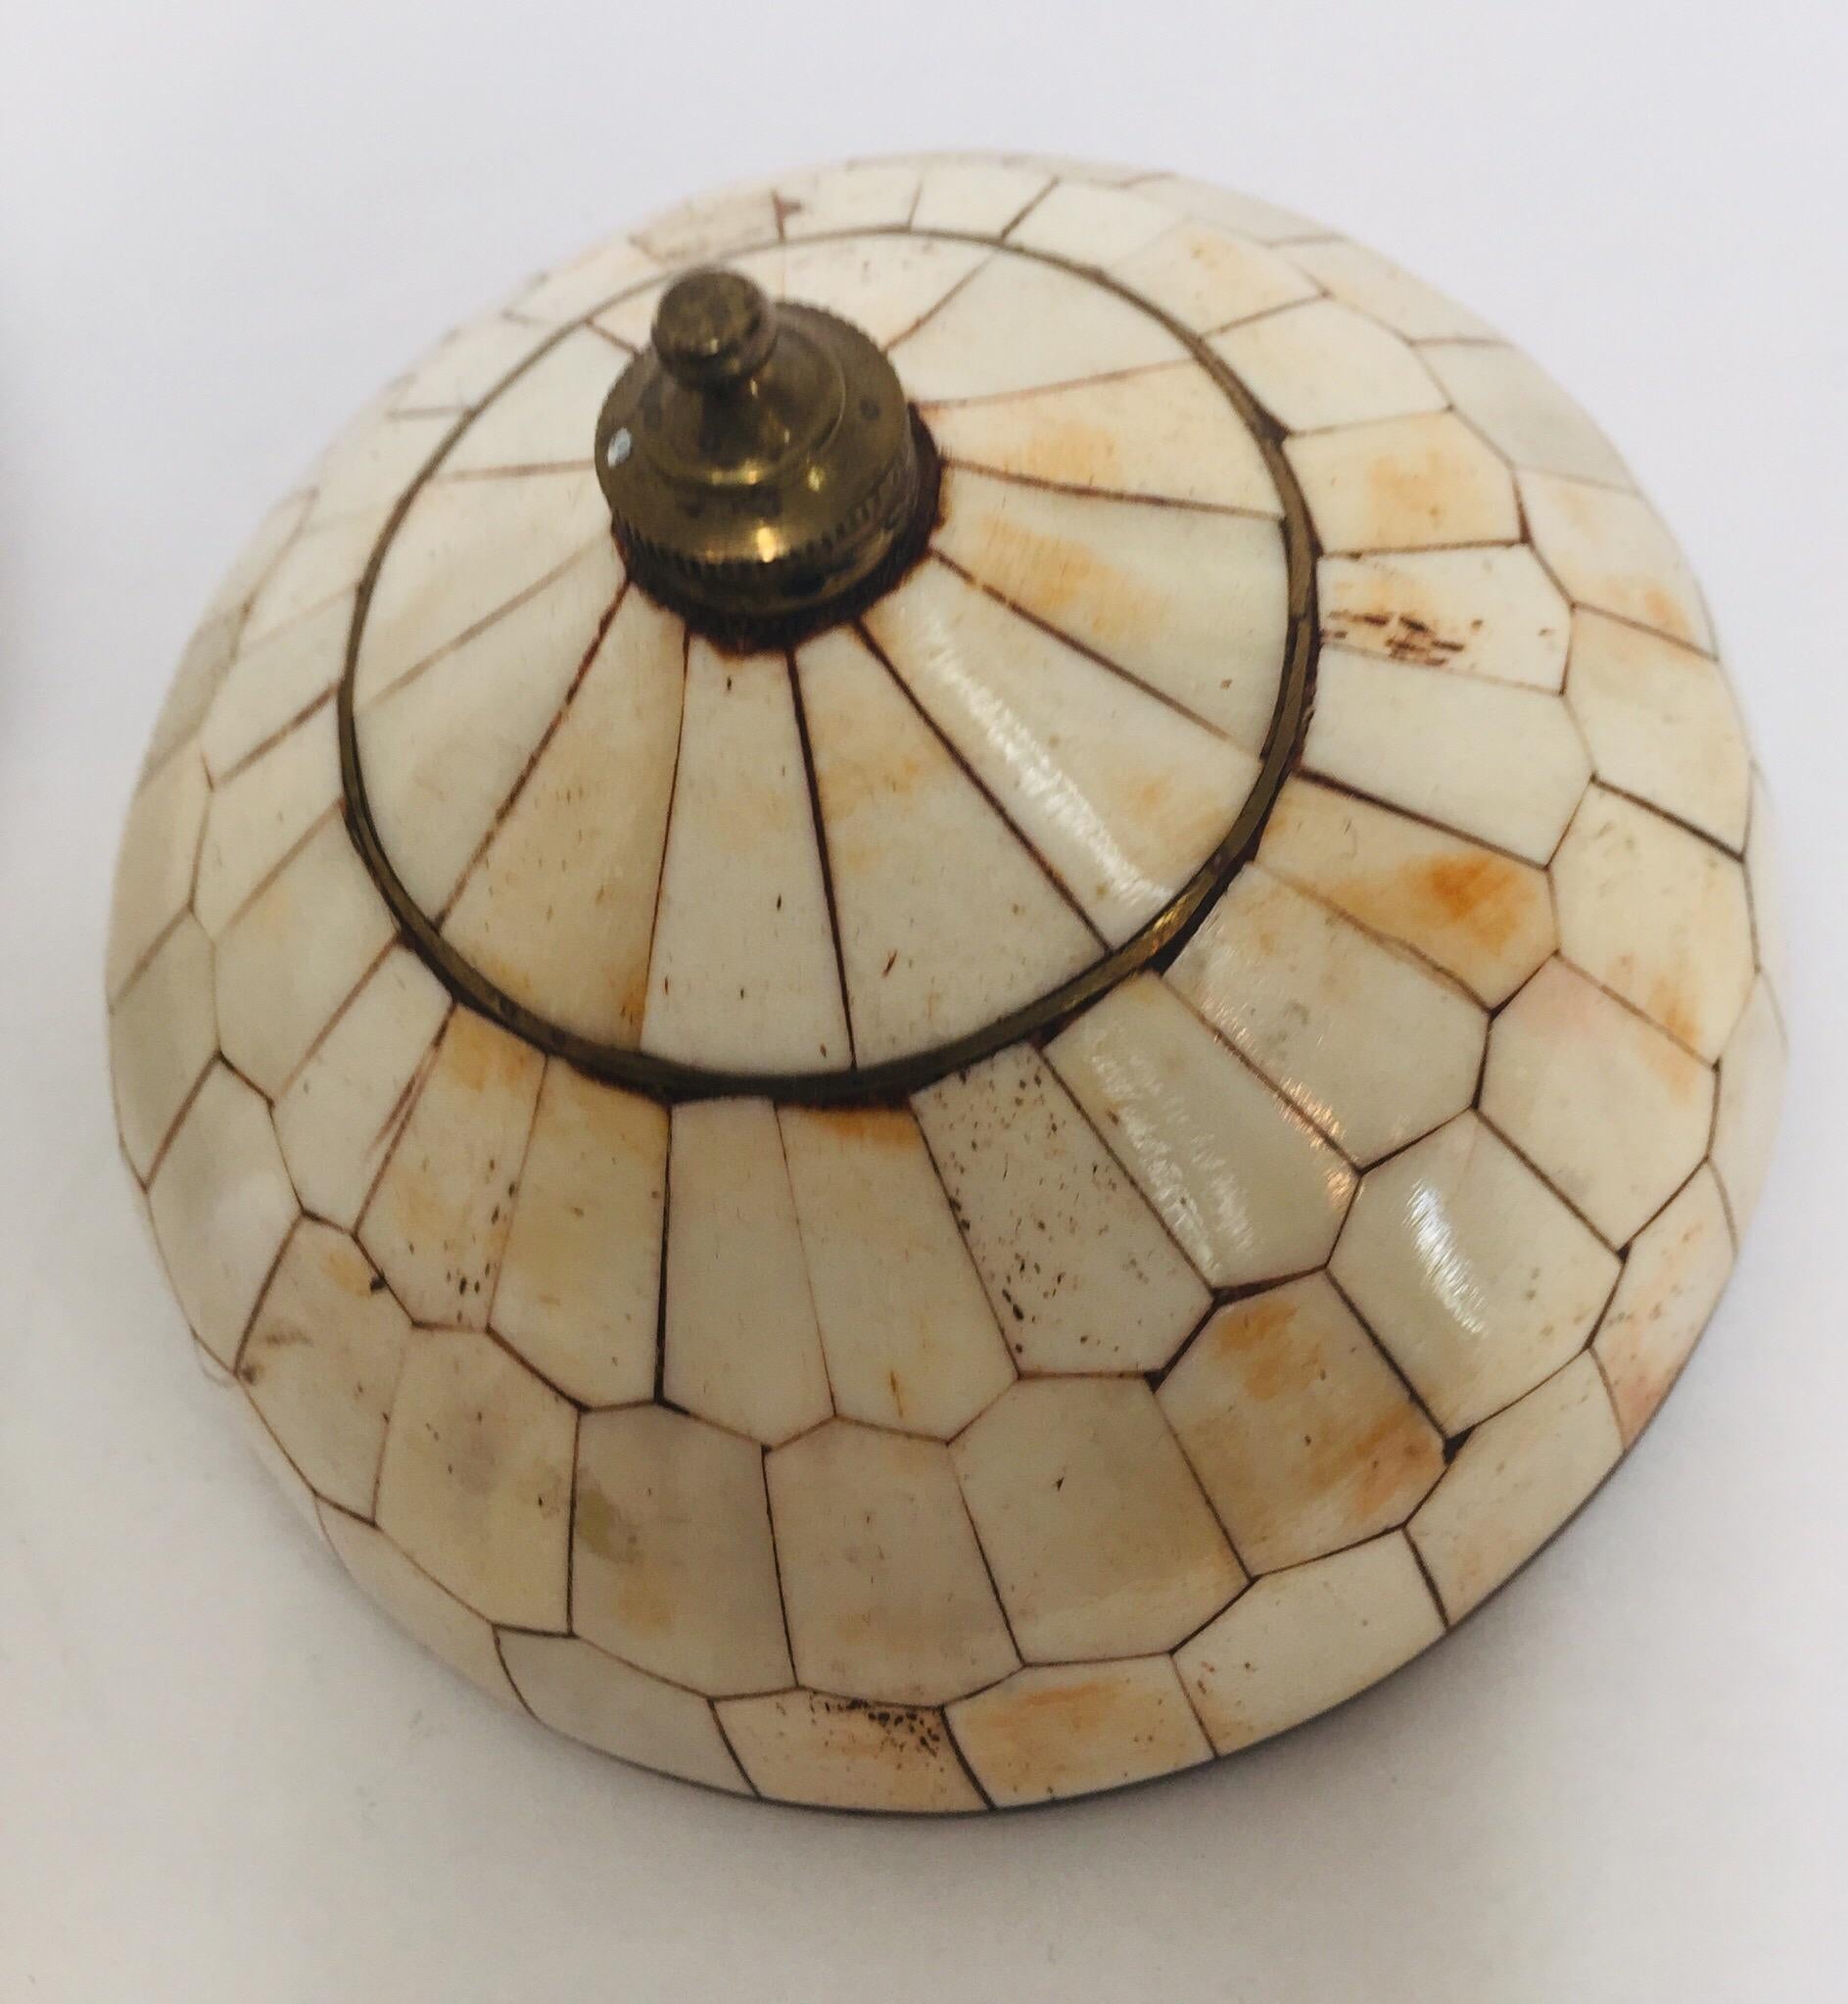 Moroccan decorative round bell shaped lidded box inlaid with bone and brass.
Stylish round bell shaped Moorish trinket lidded box hand crafted with polished brass and bone inlaid, brass lined inside.
Moroccan lidded box handcrafted in Marrakech,